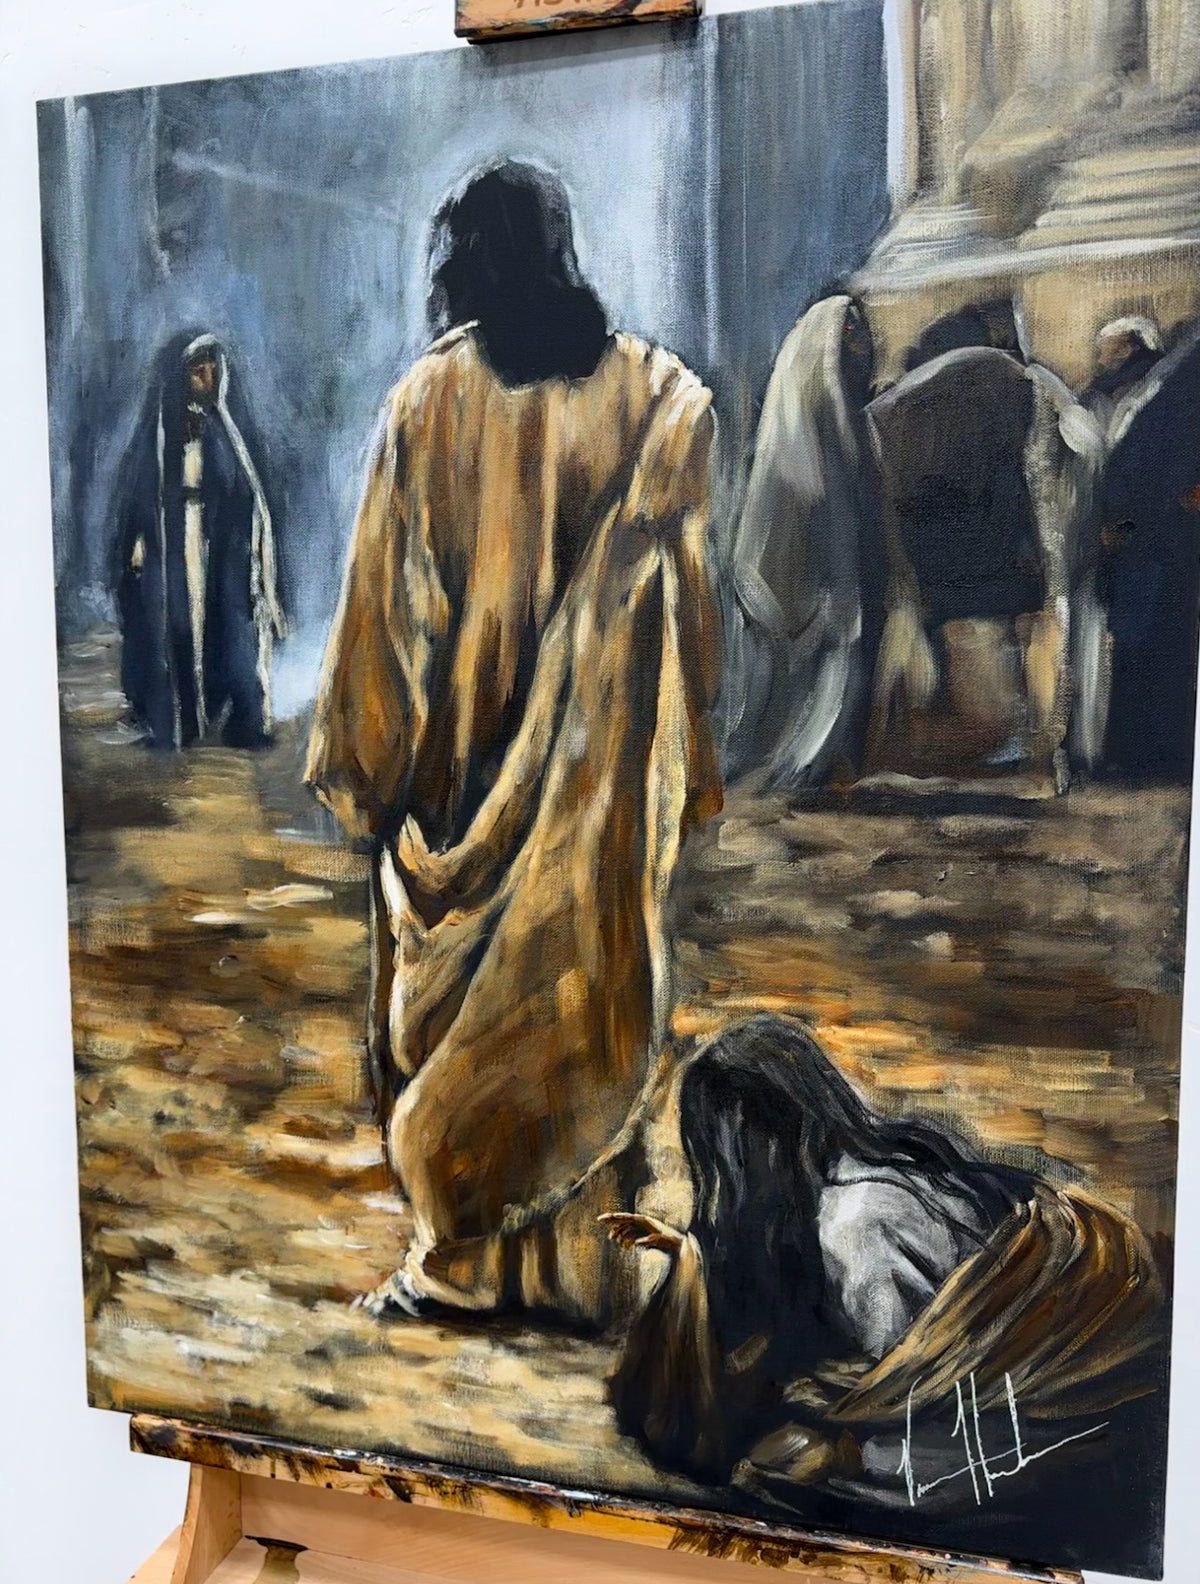 Jesus, Healer - Just One Touch - 24”x30” Original Acrylic Painting